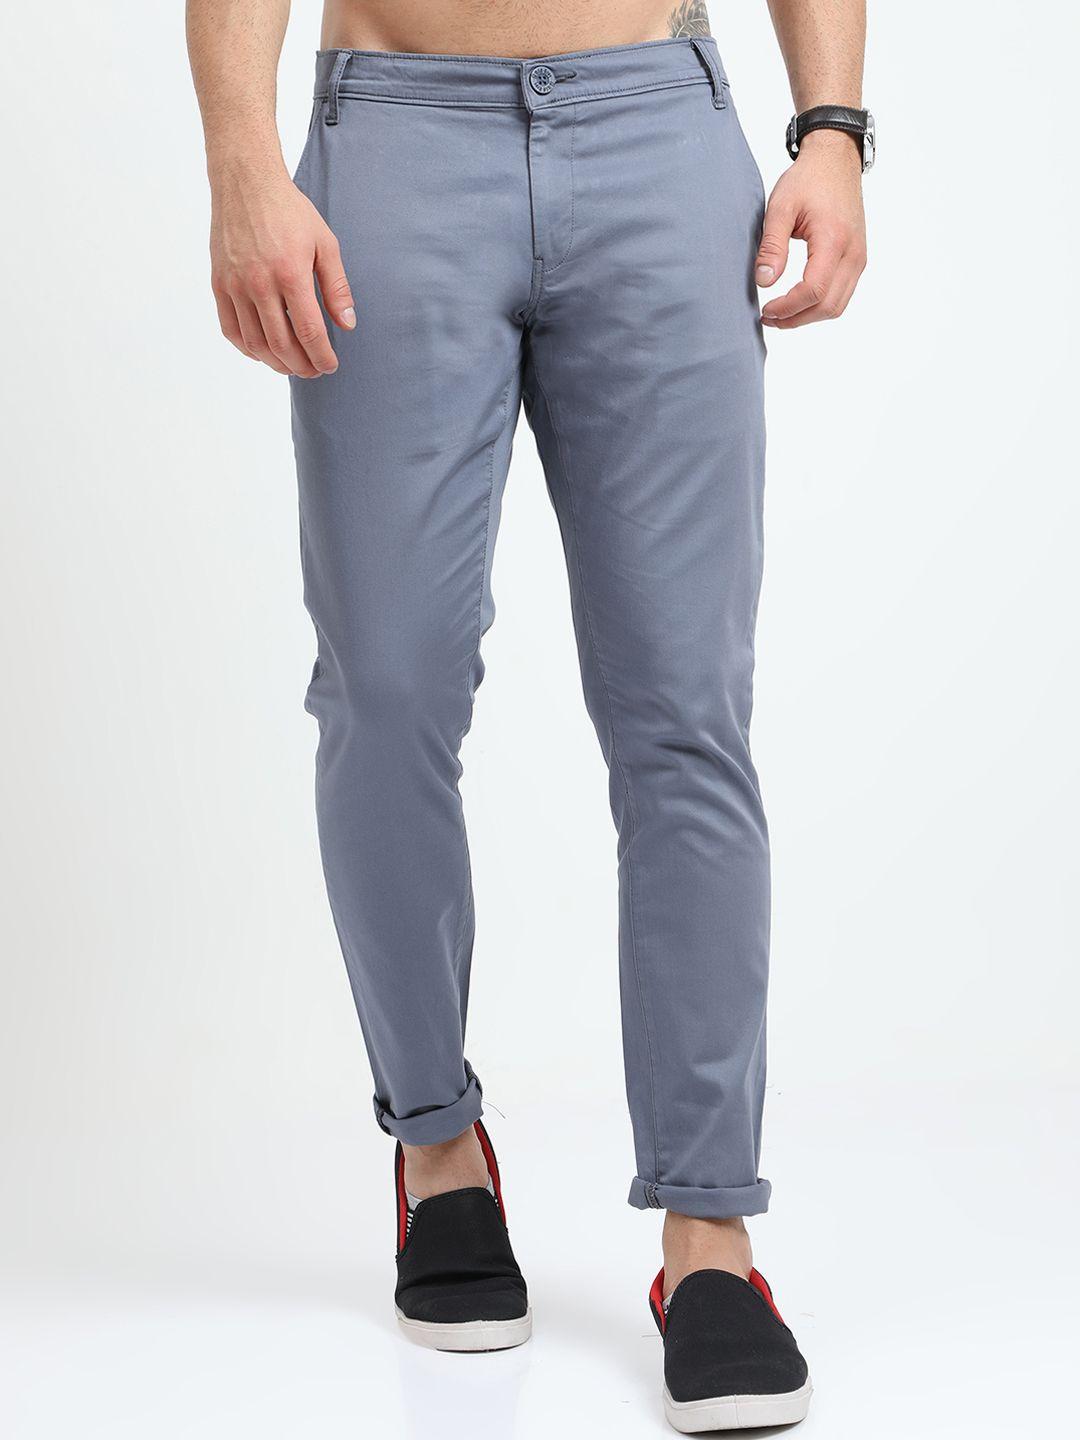 old grey men grey slim fit cotton chinos trousers